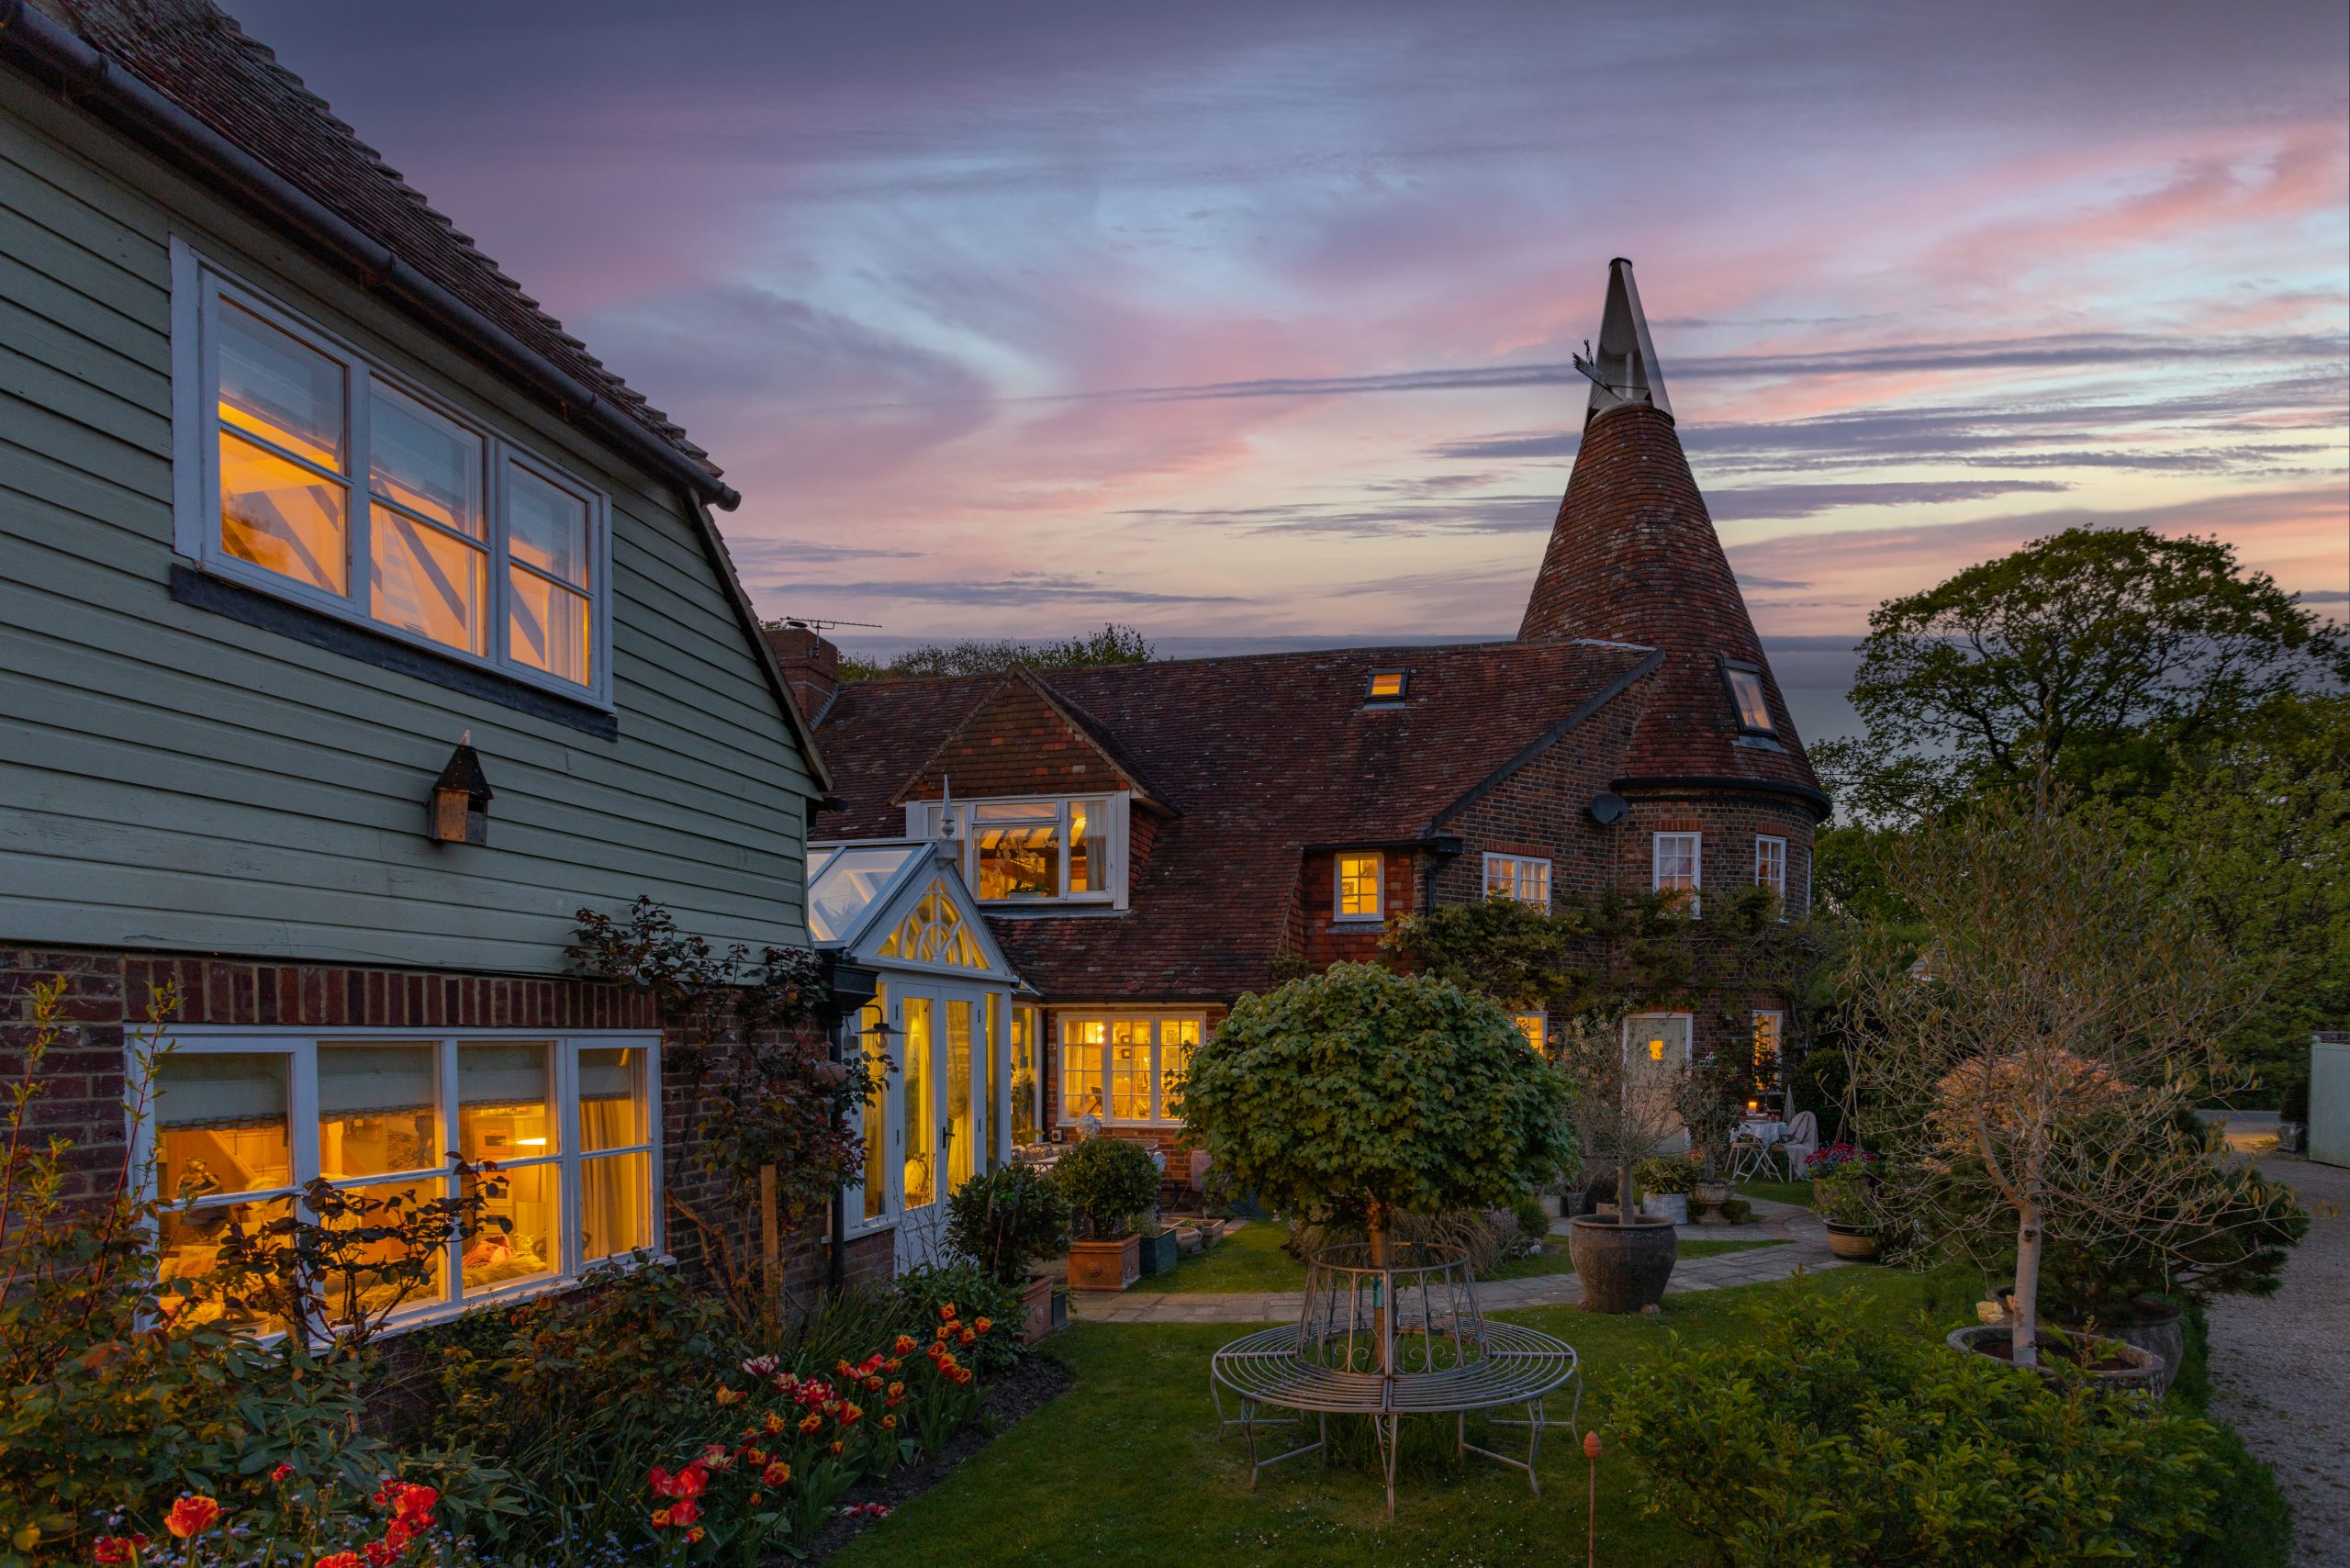 Twilight of The Old Oast in Rye